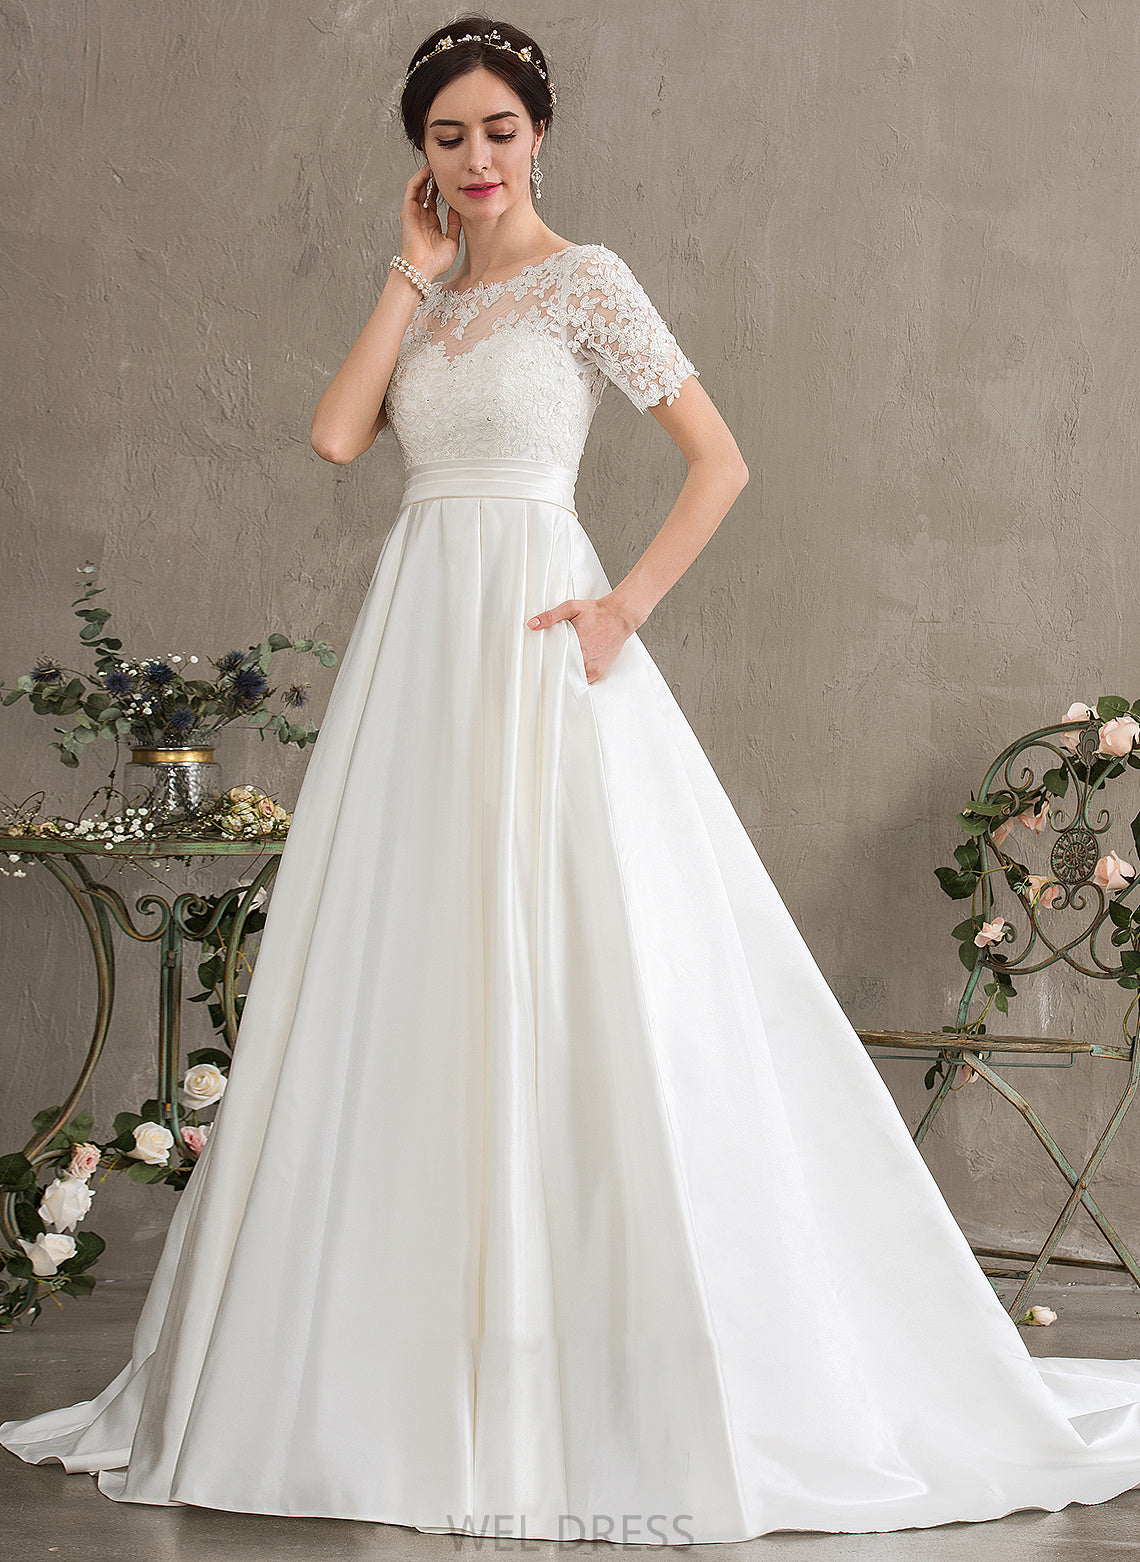 Scoop Dress Beading Court Wedding Train Pockets Ball-Gown/Princess Neck Wedding Dresses Jacey Sequins With Satin